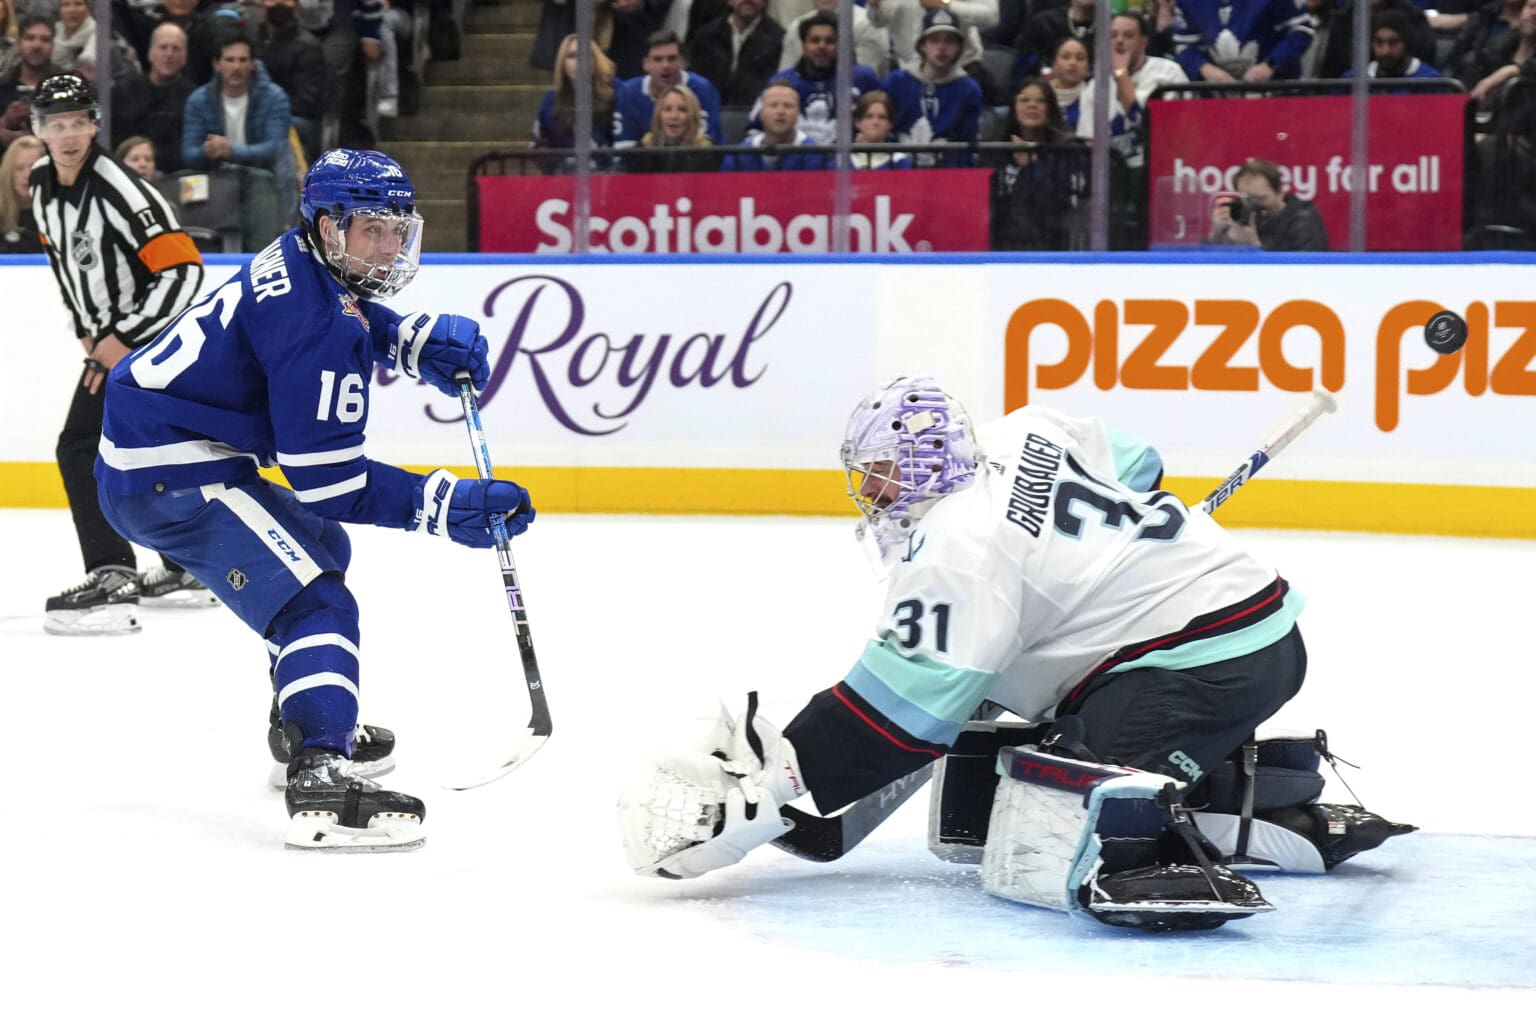 Toronto Maple Leafs' Mitchell Marner revs up his stick to take a shot as a goalie crouches to try and block.